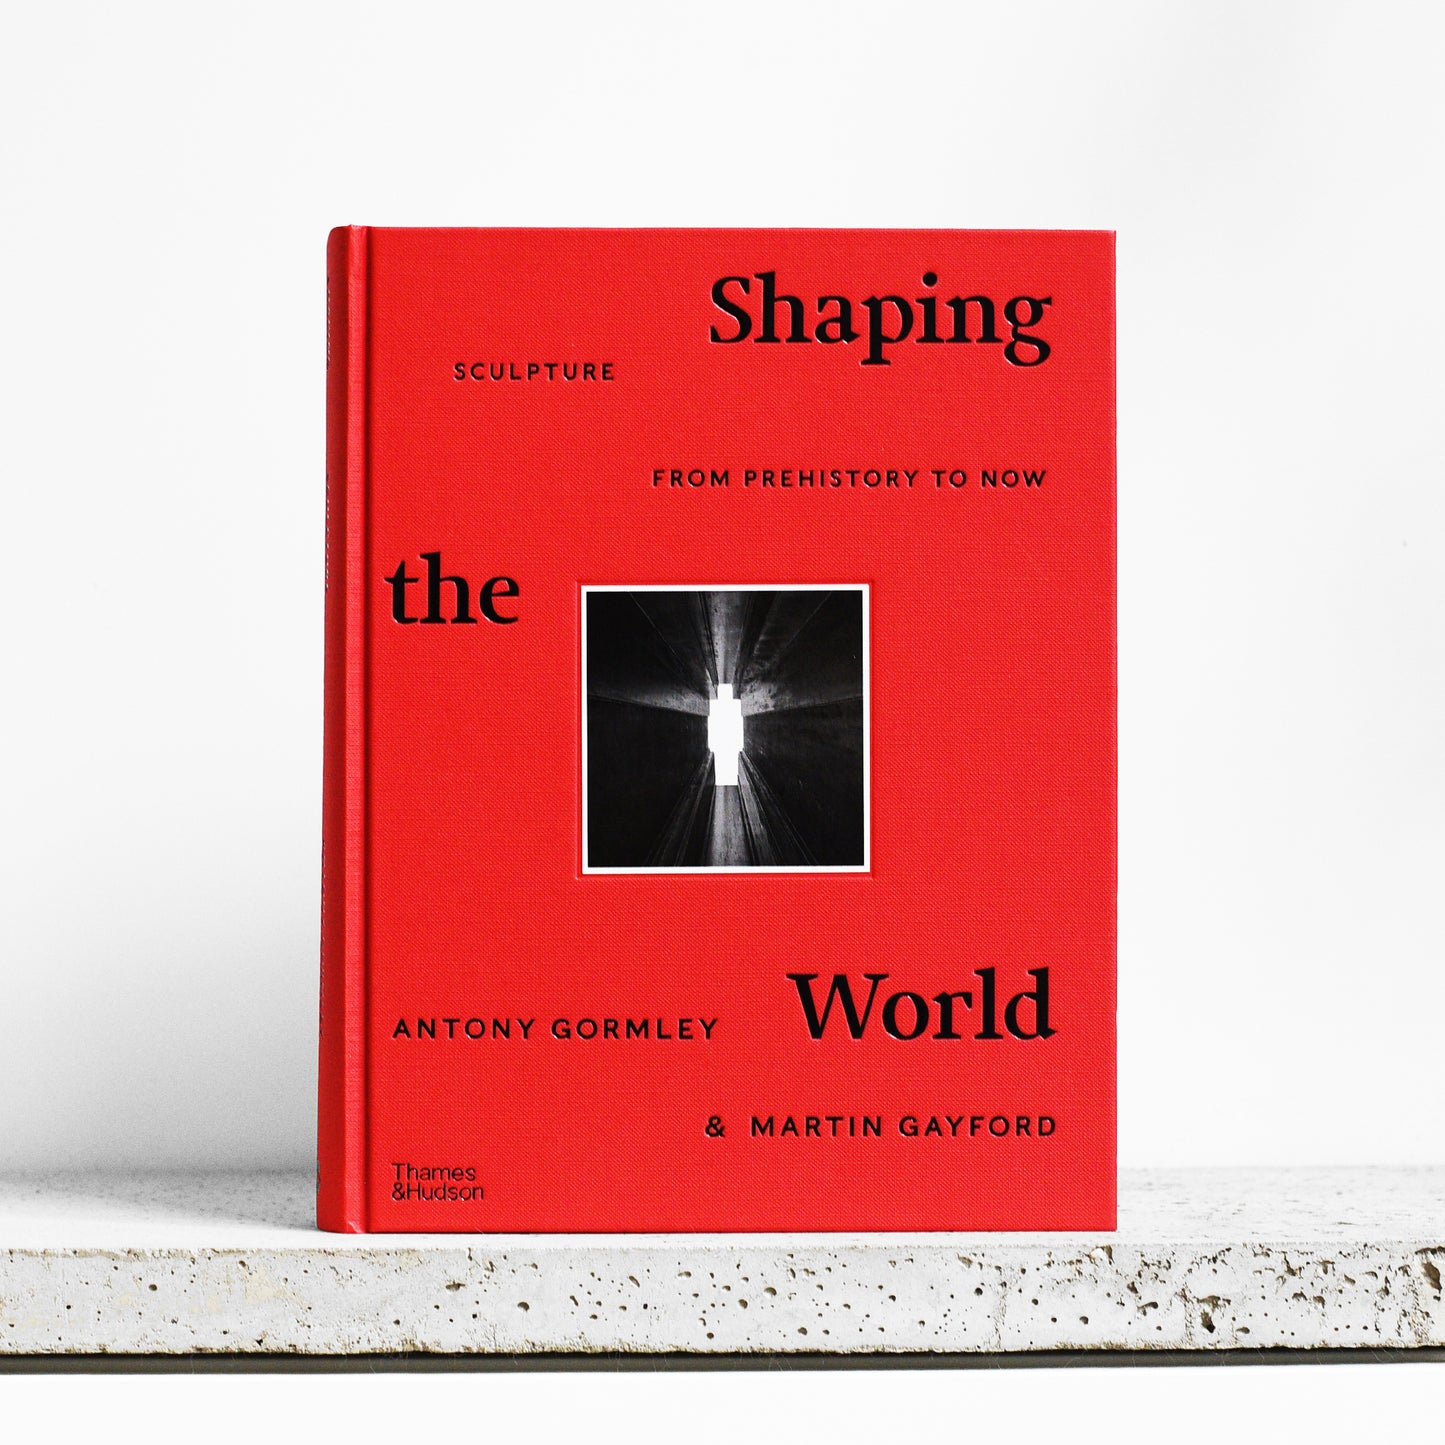 Shaping the World: Sculpture from Prehistory to Now - Antony Gormley, Martin Gayford